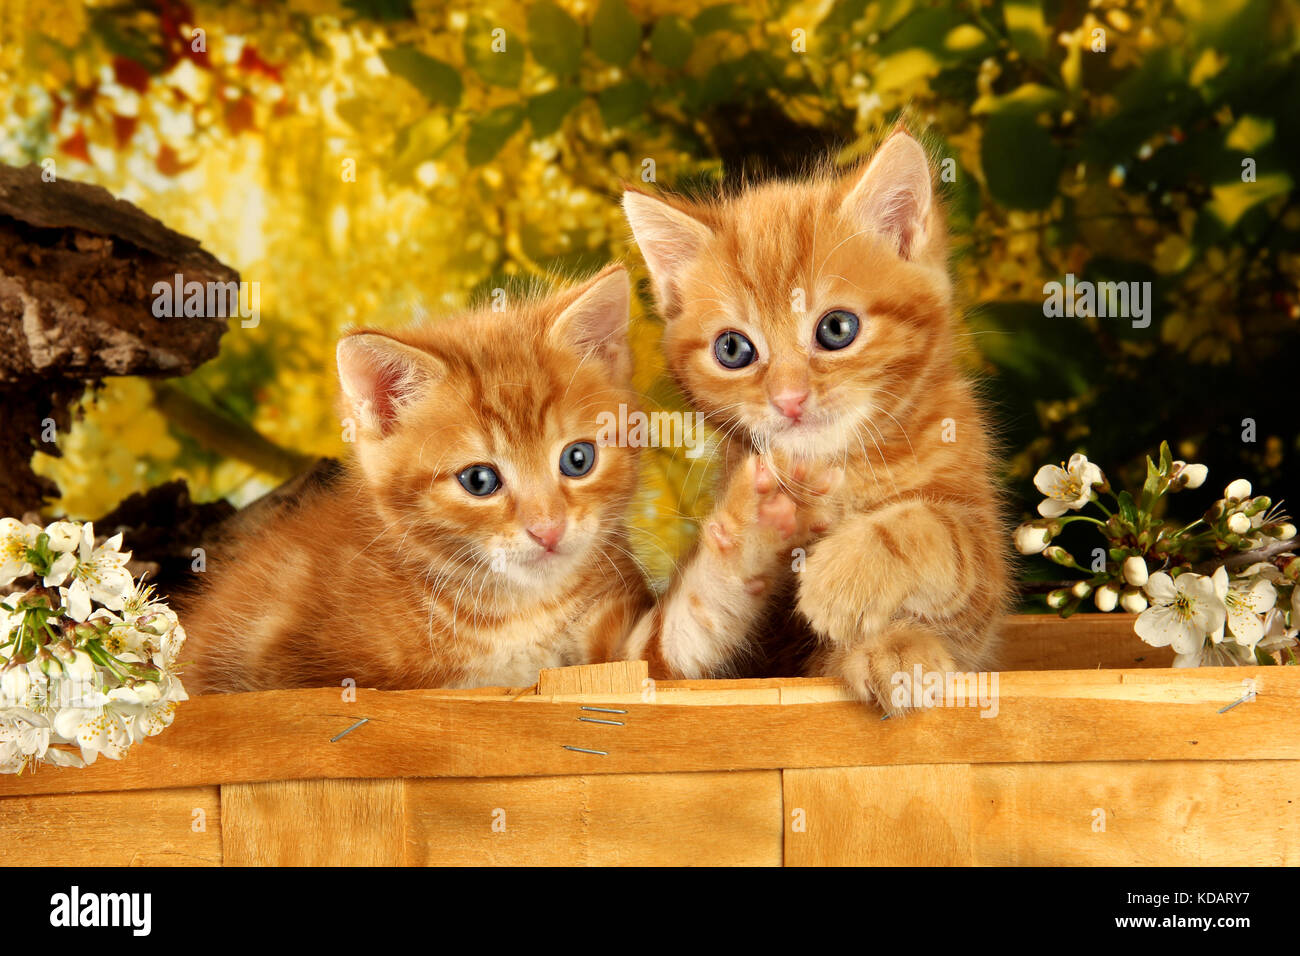 two domestic kittens, ginger, red tabby, lying in a basket between spring flowers Stock Photo